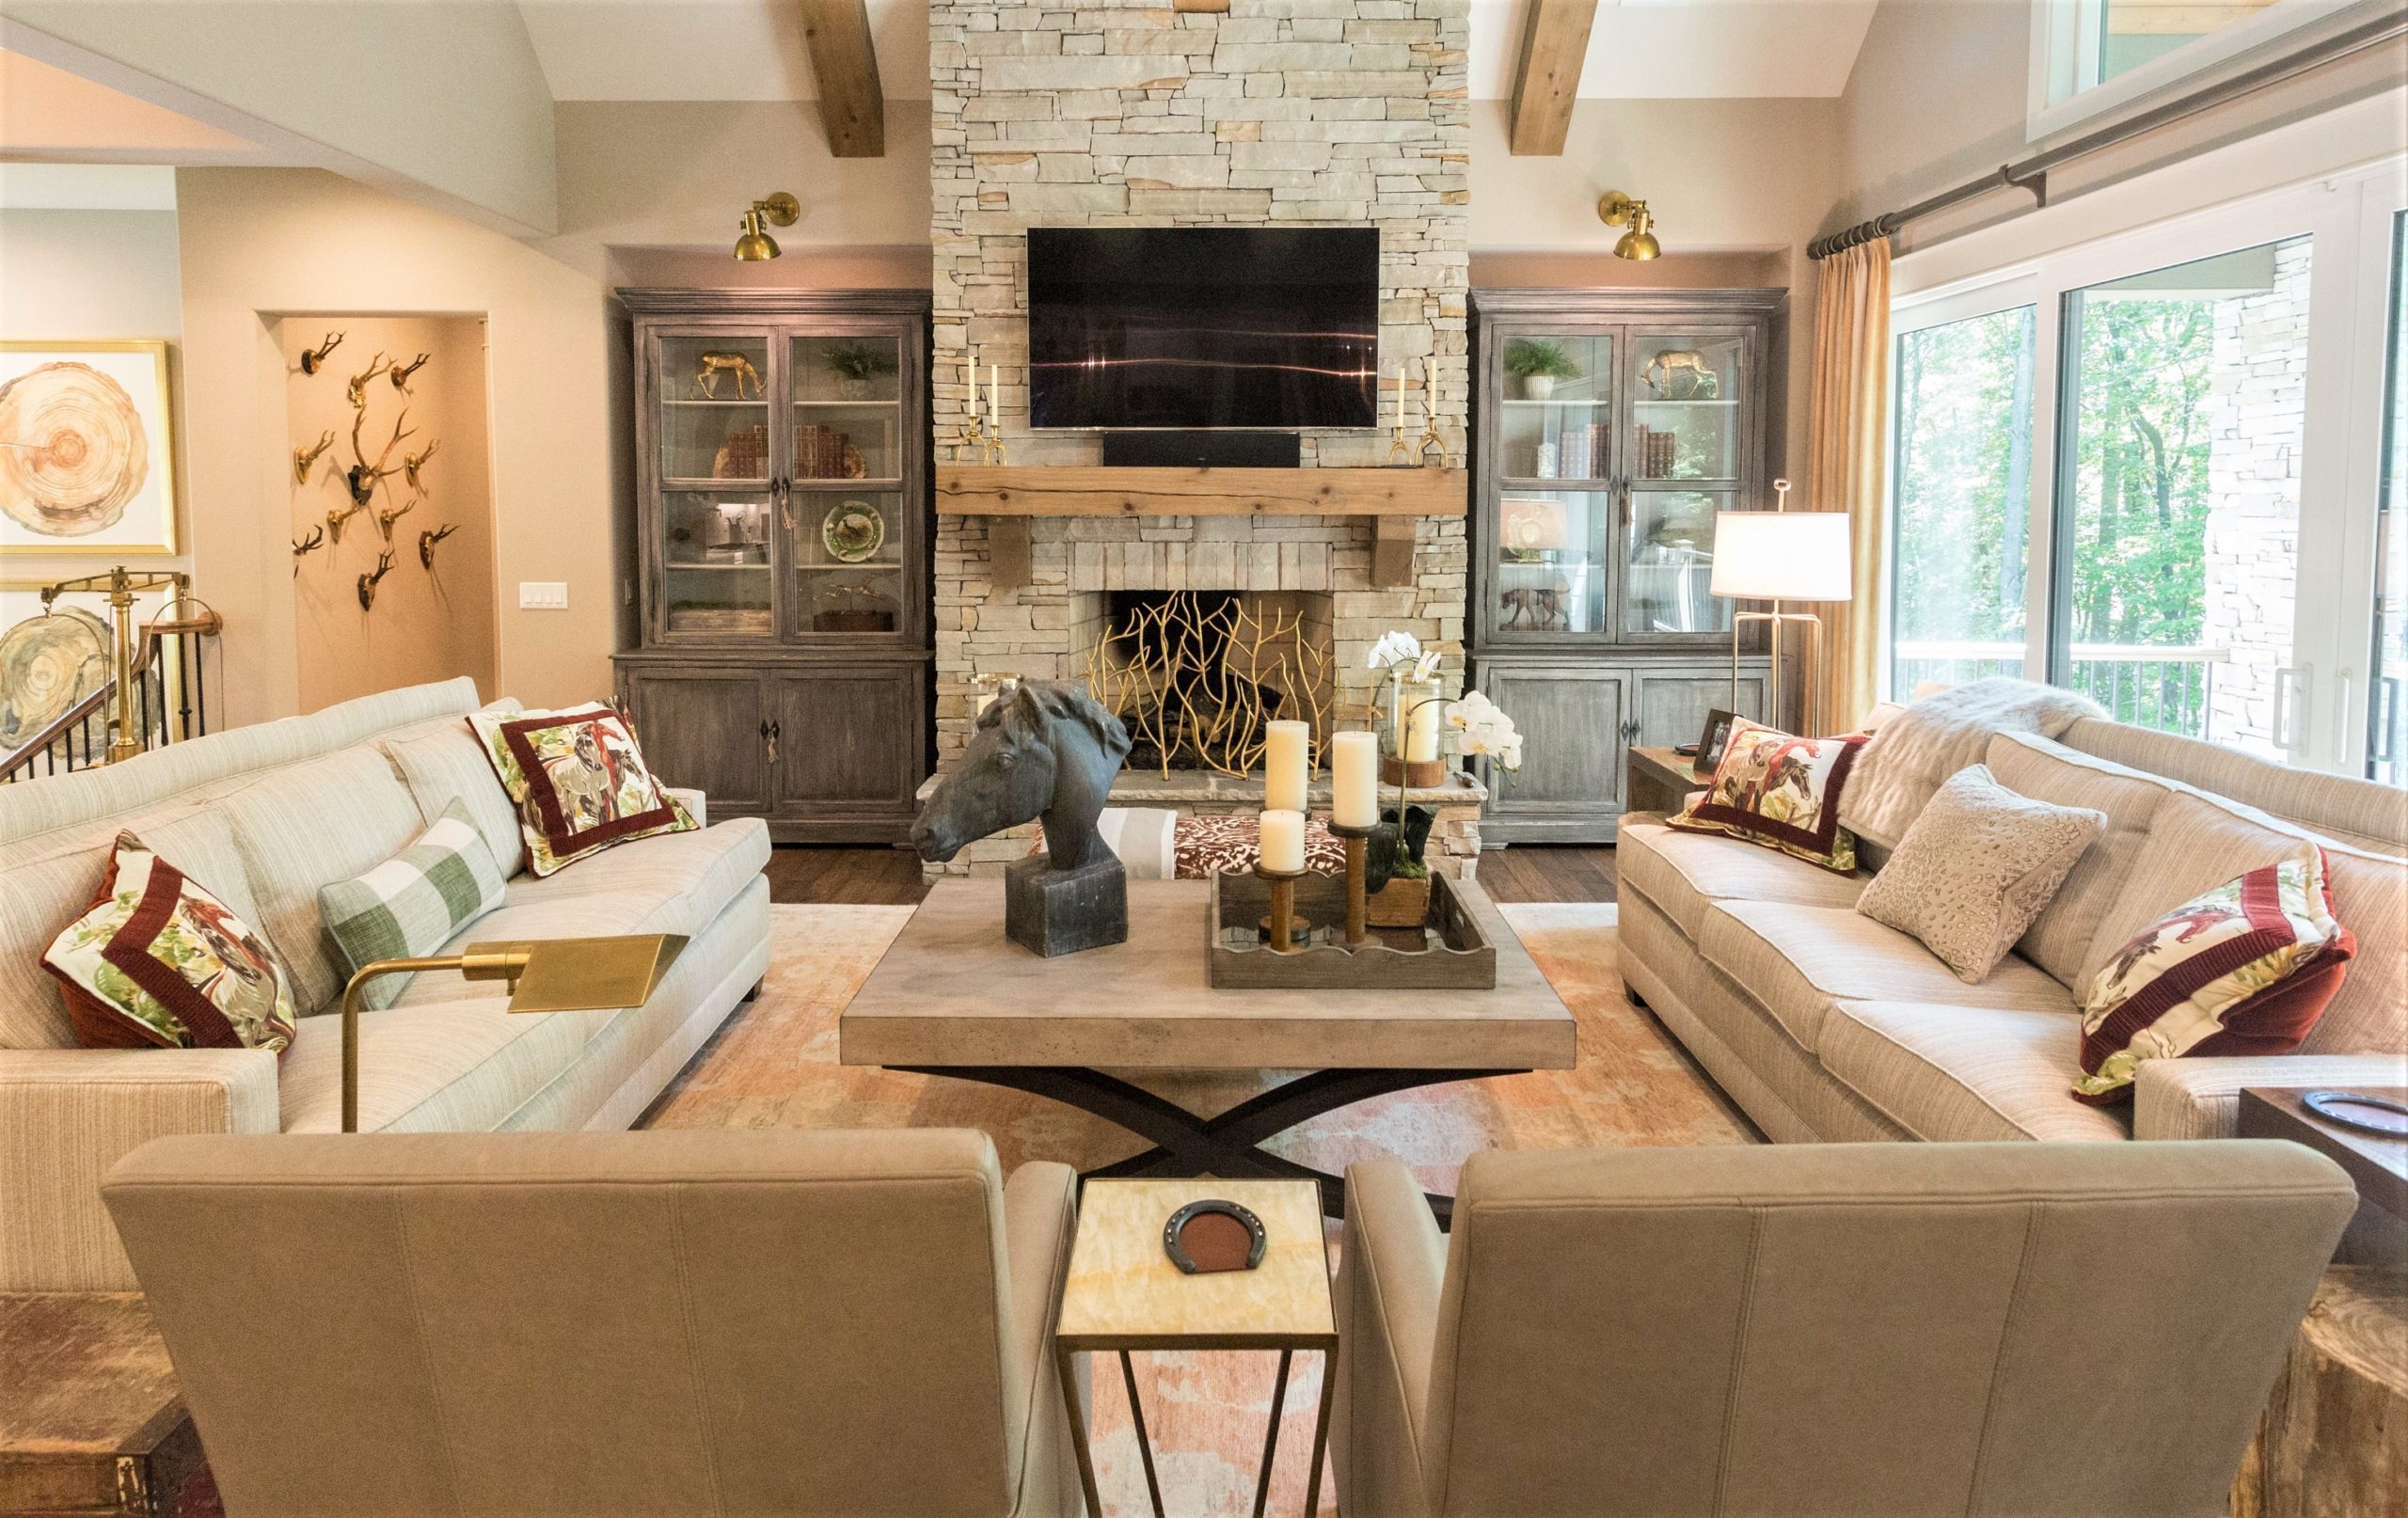 A living room full of warmth and texture found in a Greenville, South Carolina mountain home. Stacked stone fireplace, gold light fixtures, timeless furnishings and rustic cabinetry